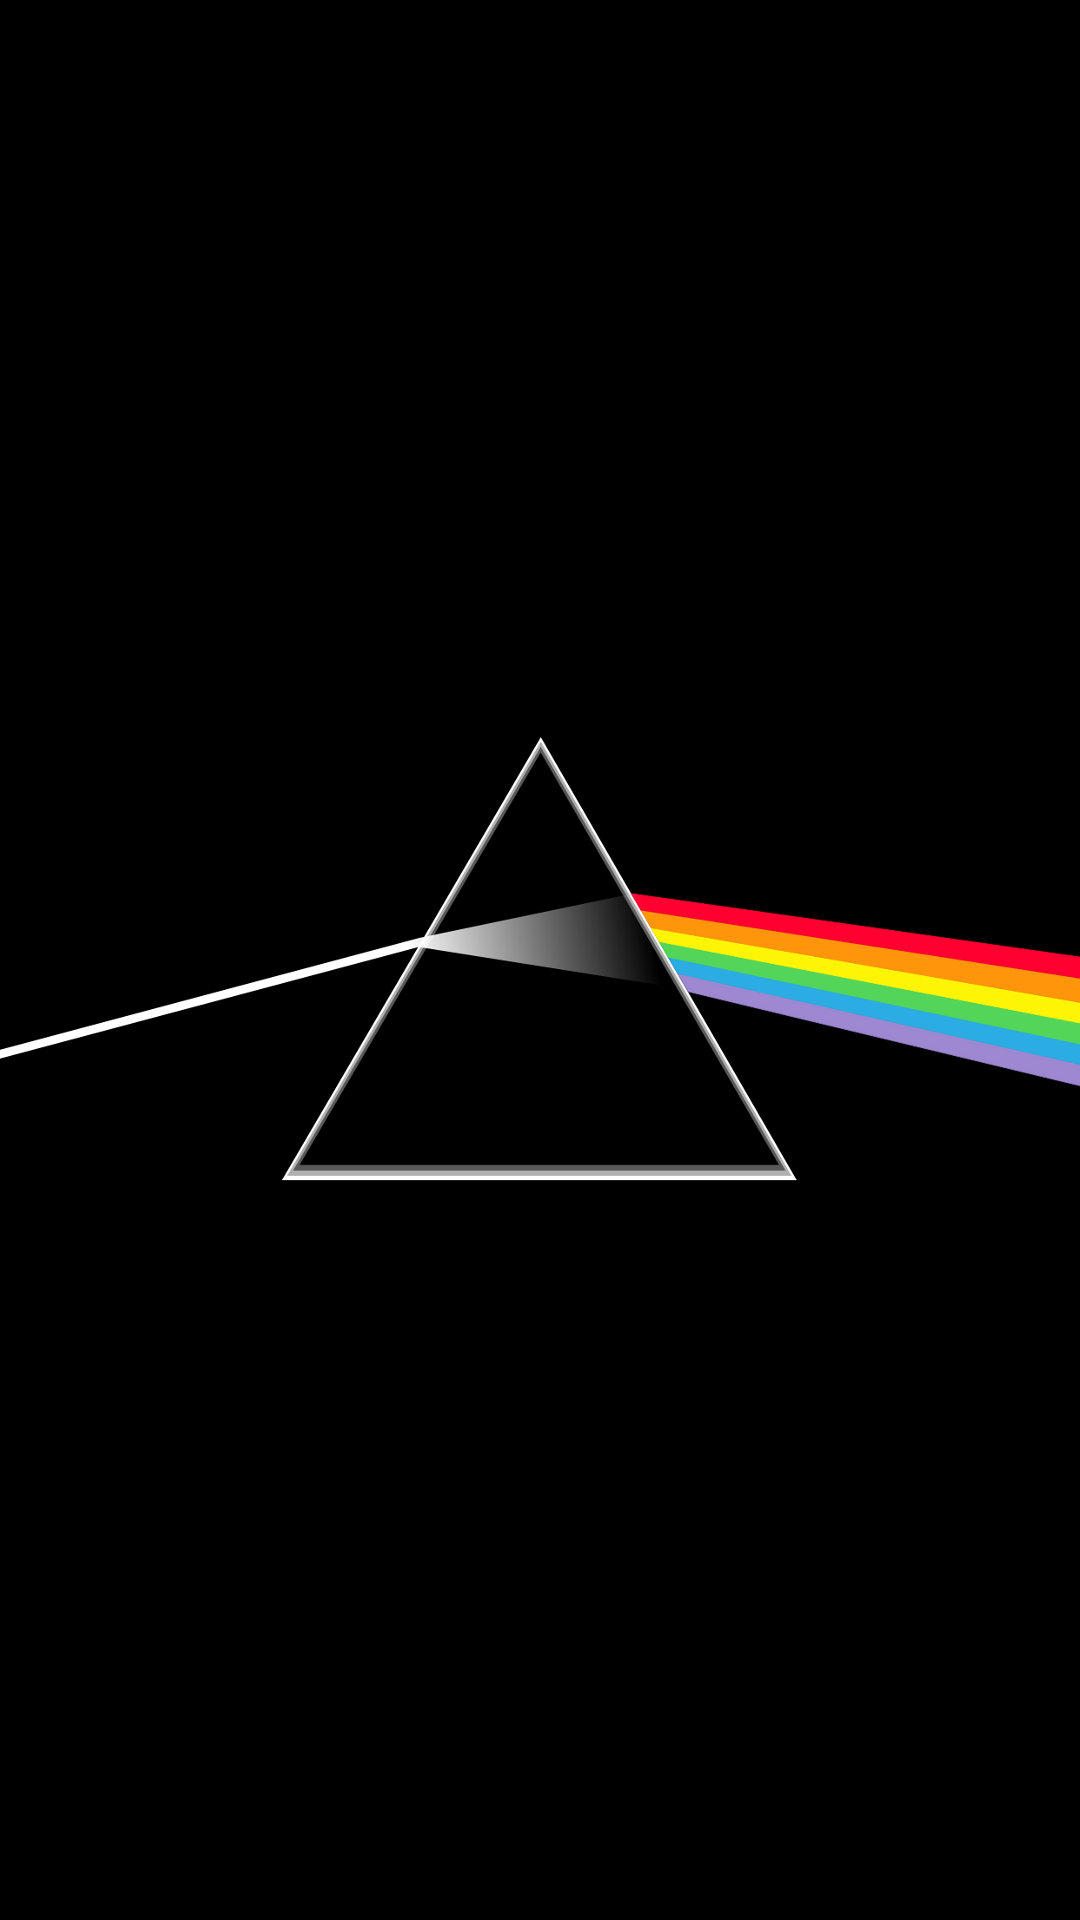 Pink Floyd Side Of The Moon [1080x1920]